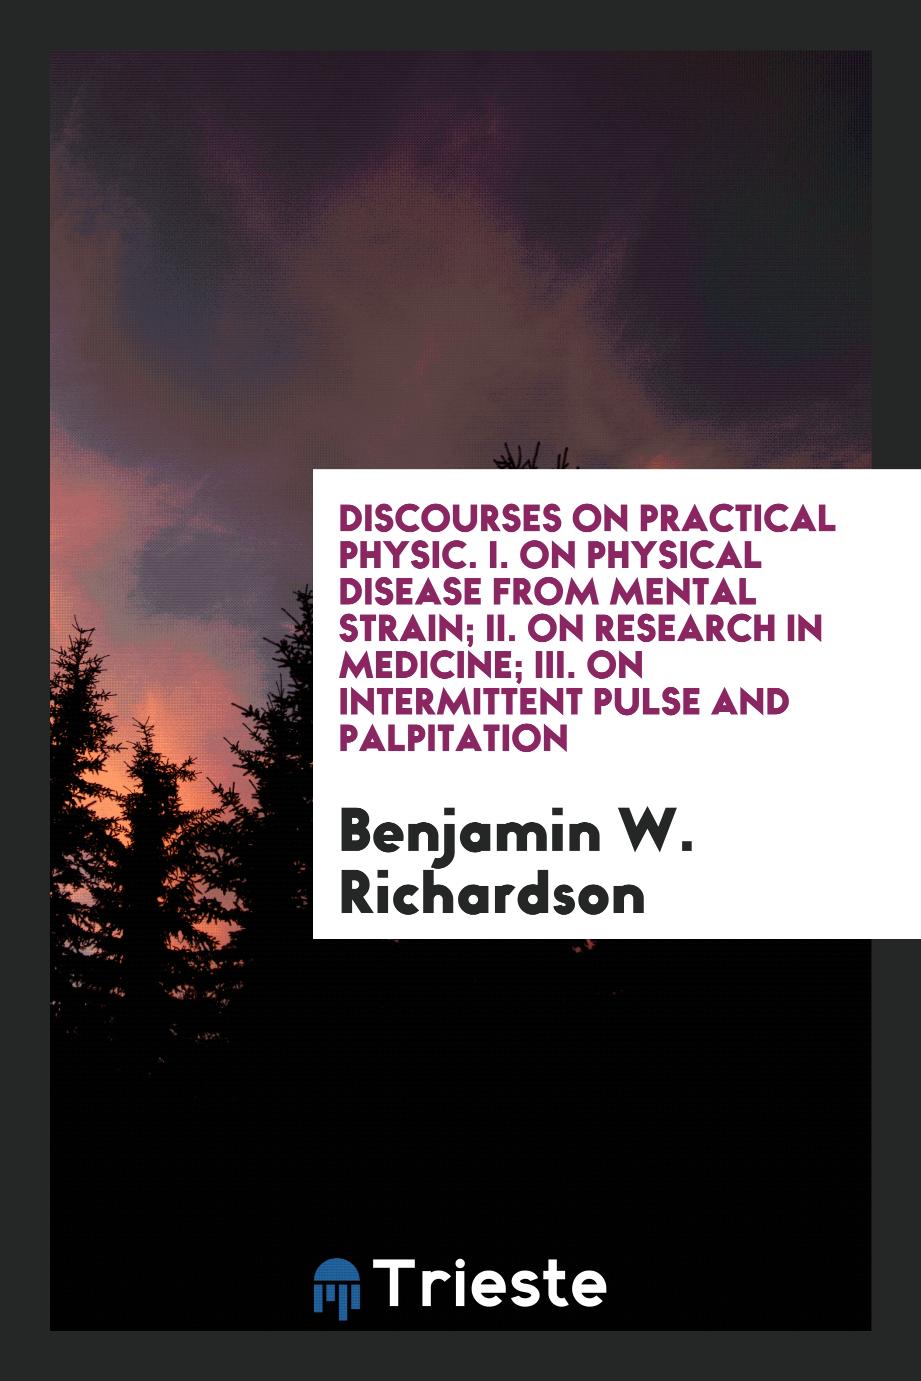 Discourses on Practical Physic. I. On Physical Disease from Mental Strain; II. On Research in Medicine; III. On Intermittent Pulse and Palpitation